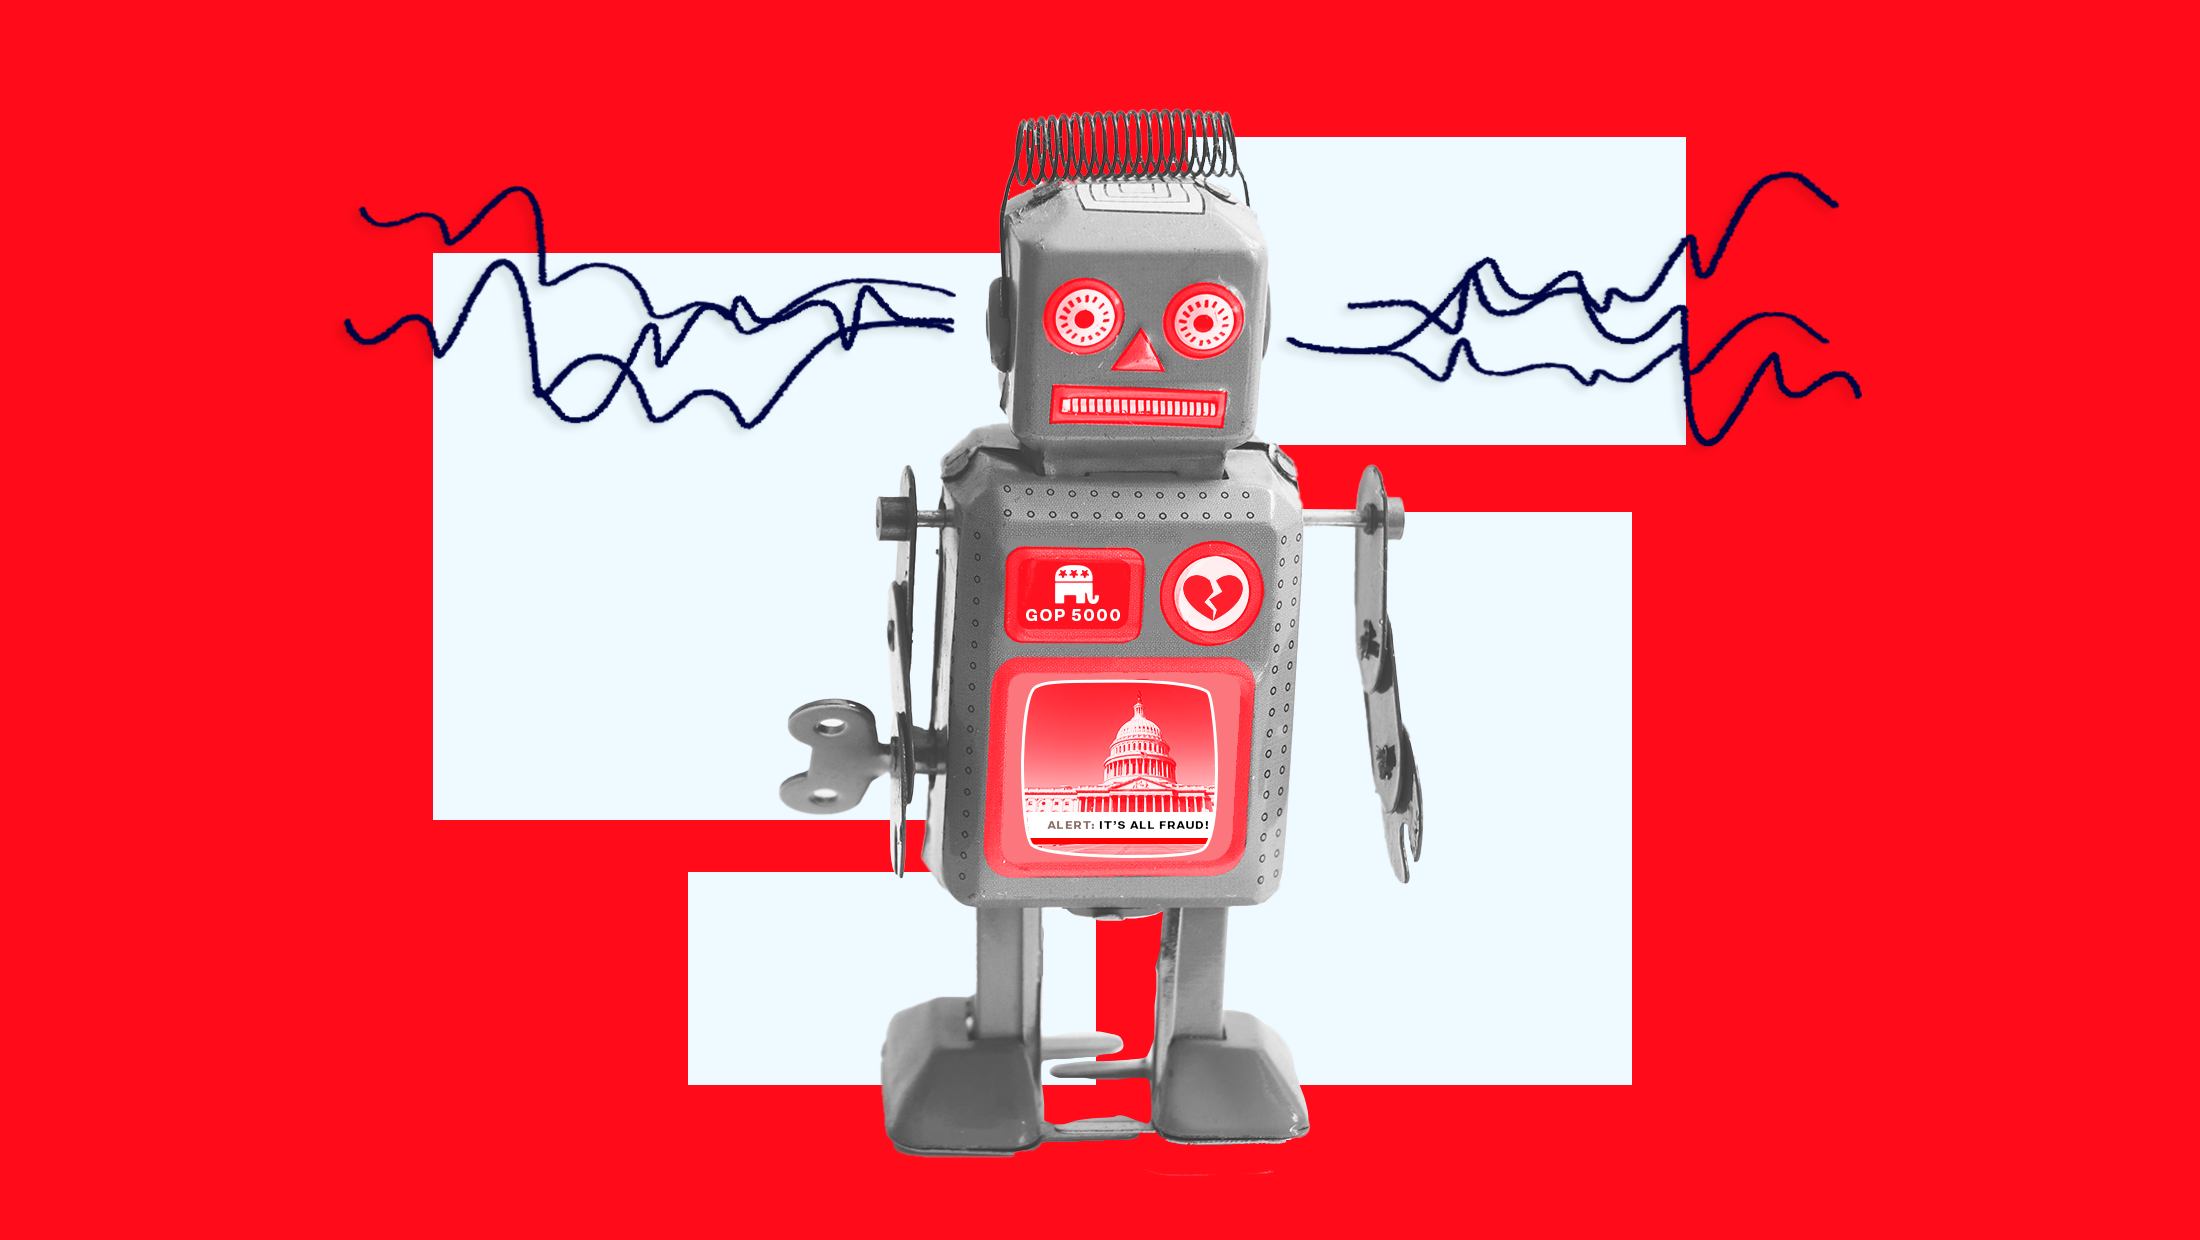 A red-tinted metal robot made up of various components including a broken heart, a badge with the GOP logo that reads "GOP 5000", and a TV featuring the U.S. Capitol with a breaking news banner that says "ALERT: IT'S ALL FRAUD"